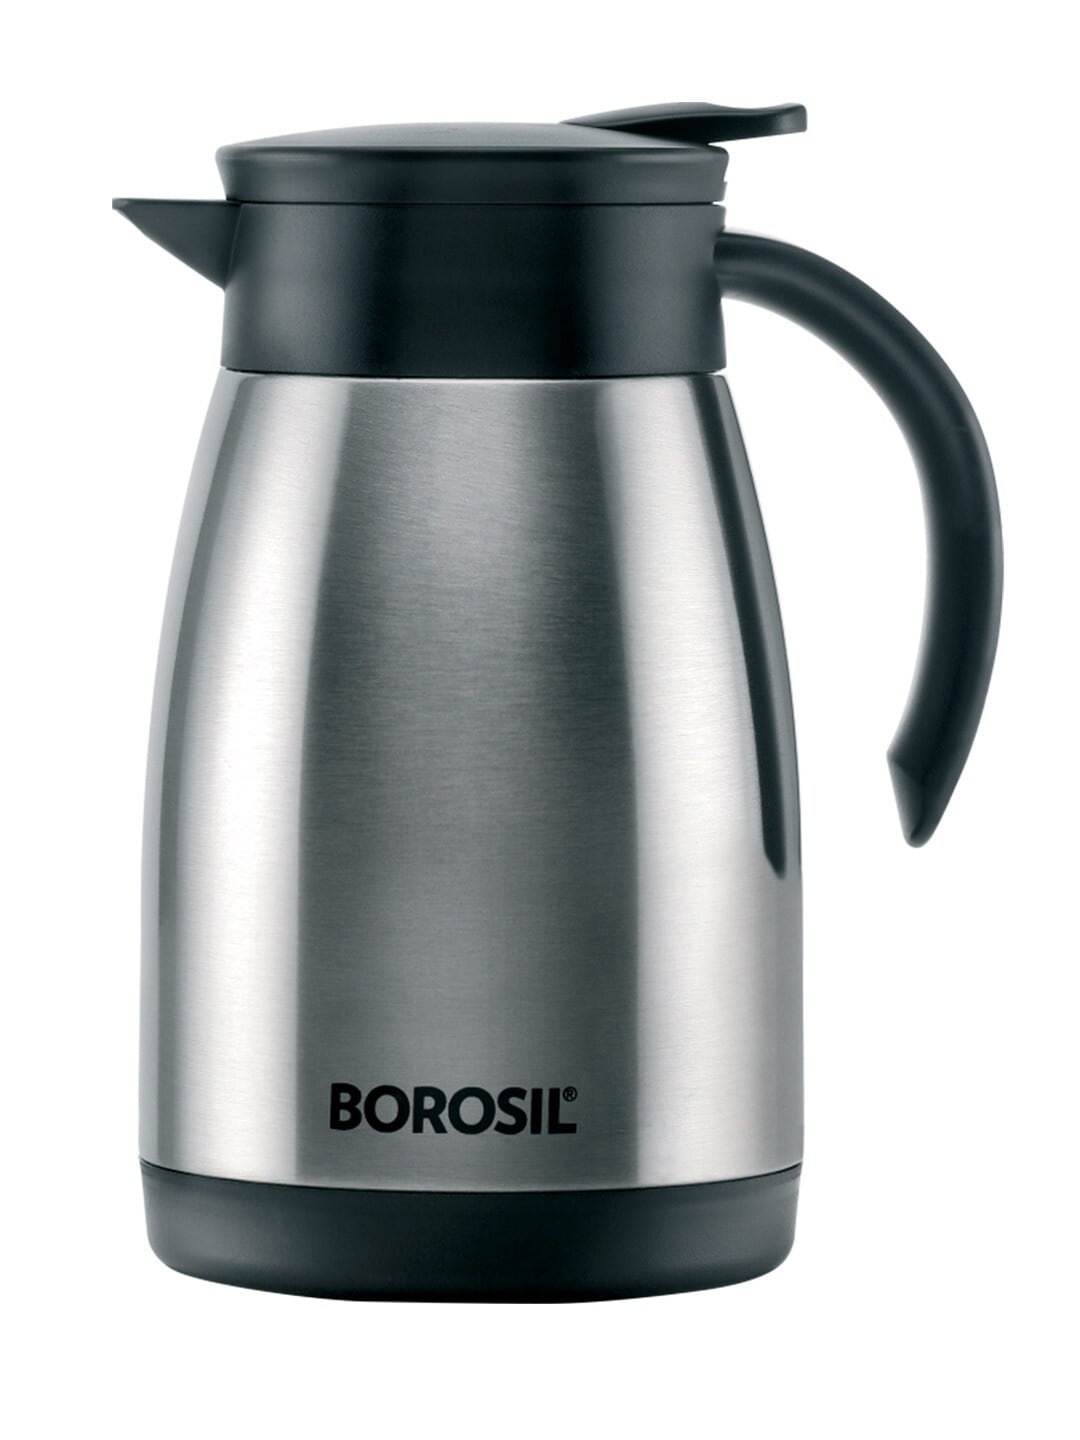 BOROSIL Steel & Black Solid Stainless Steel Glossy Kettle Price in India